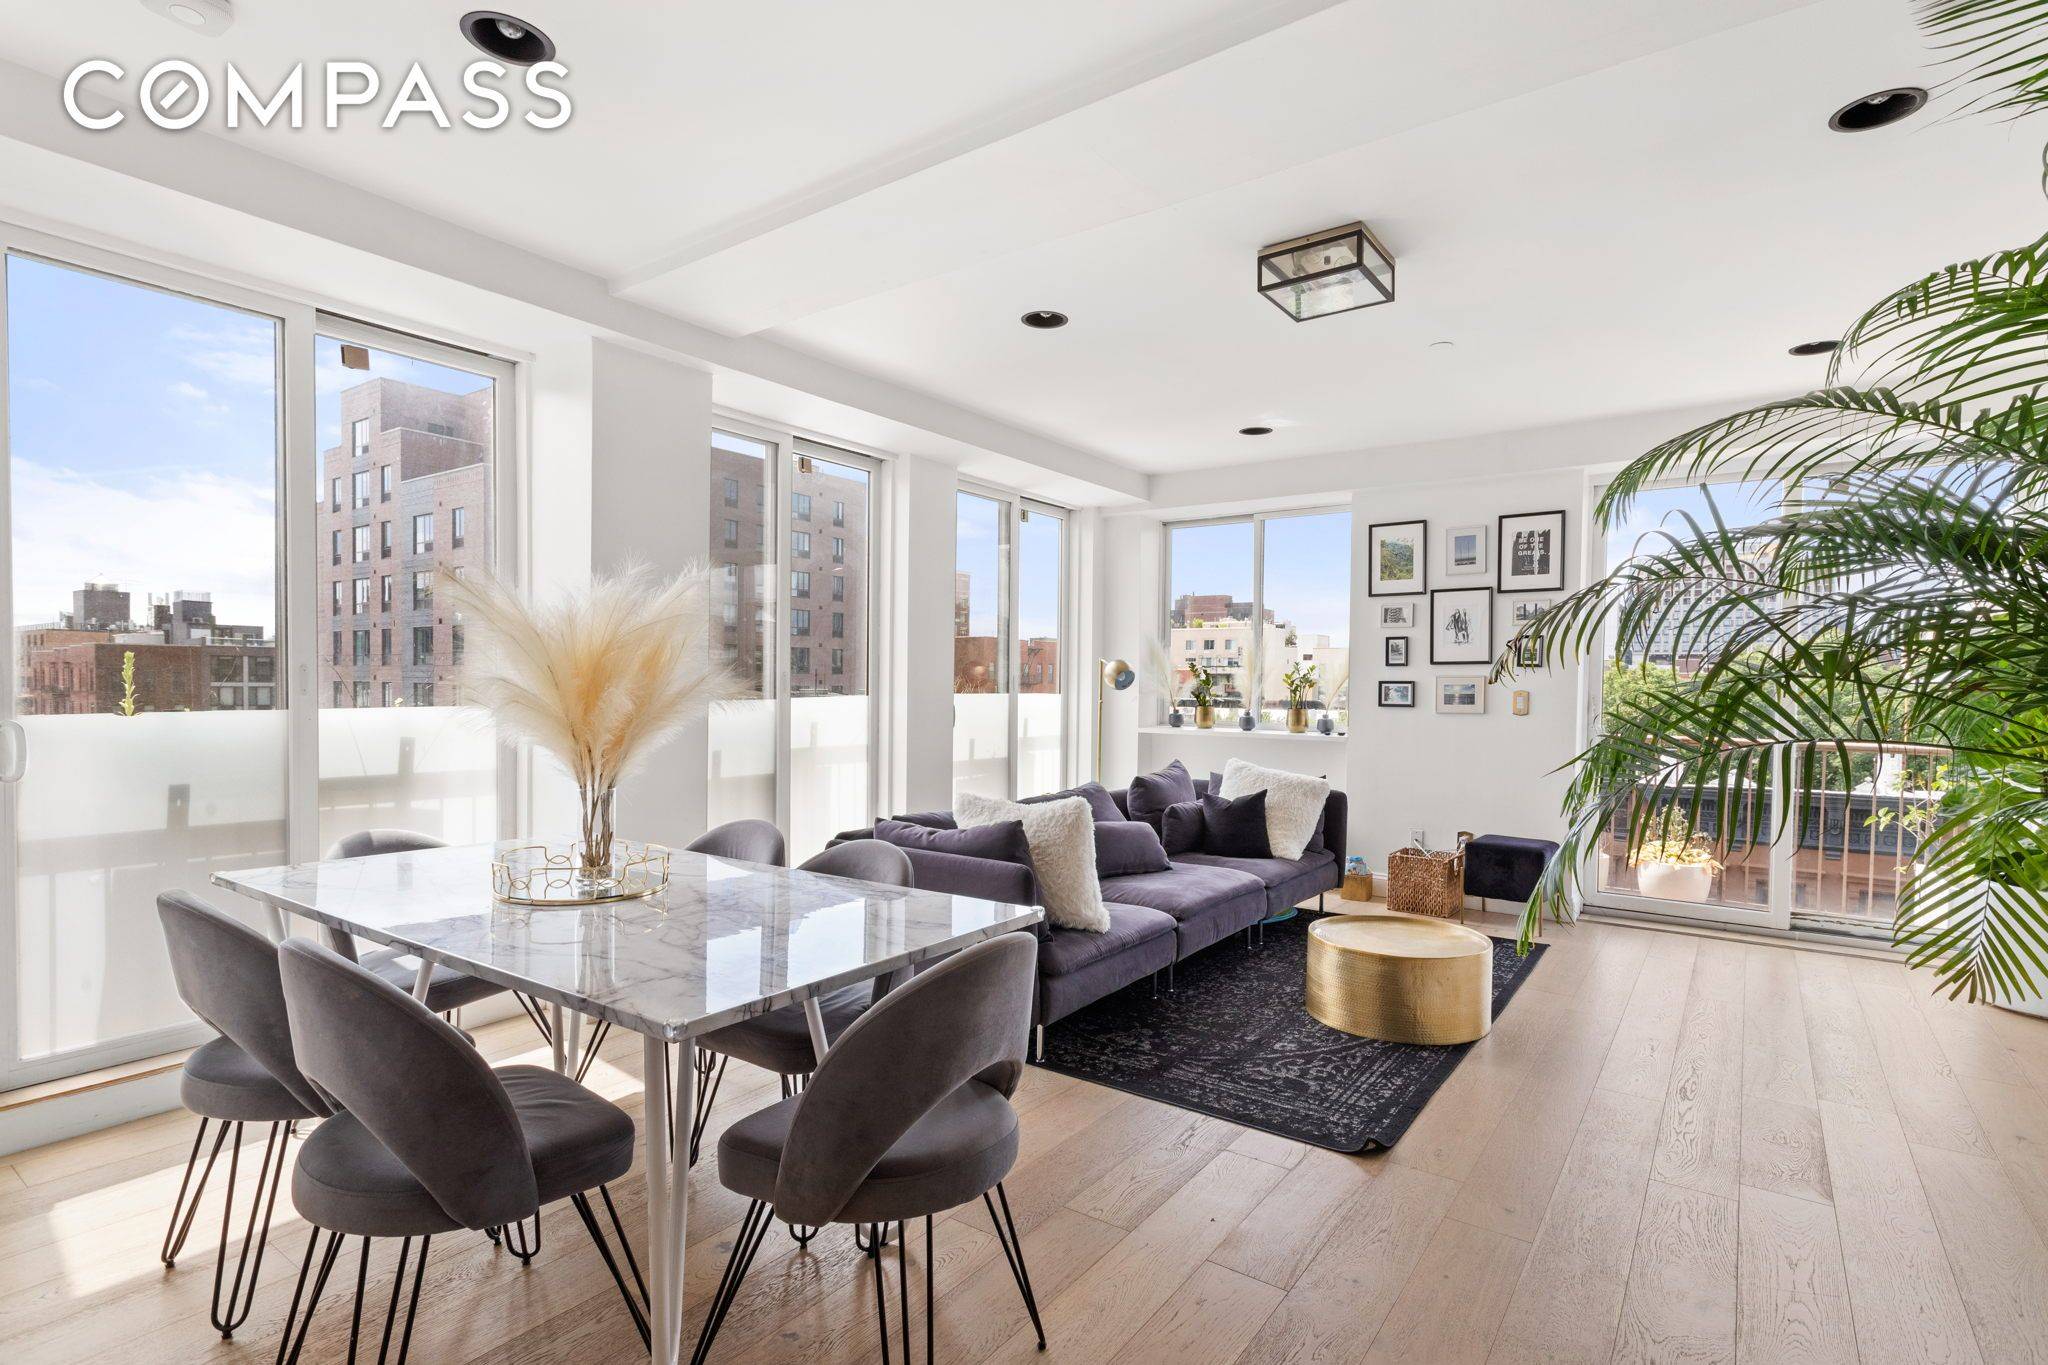 Three bedroom penthouse duplex for sale in Harlem with floor to ceiling windows.